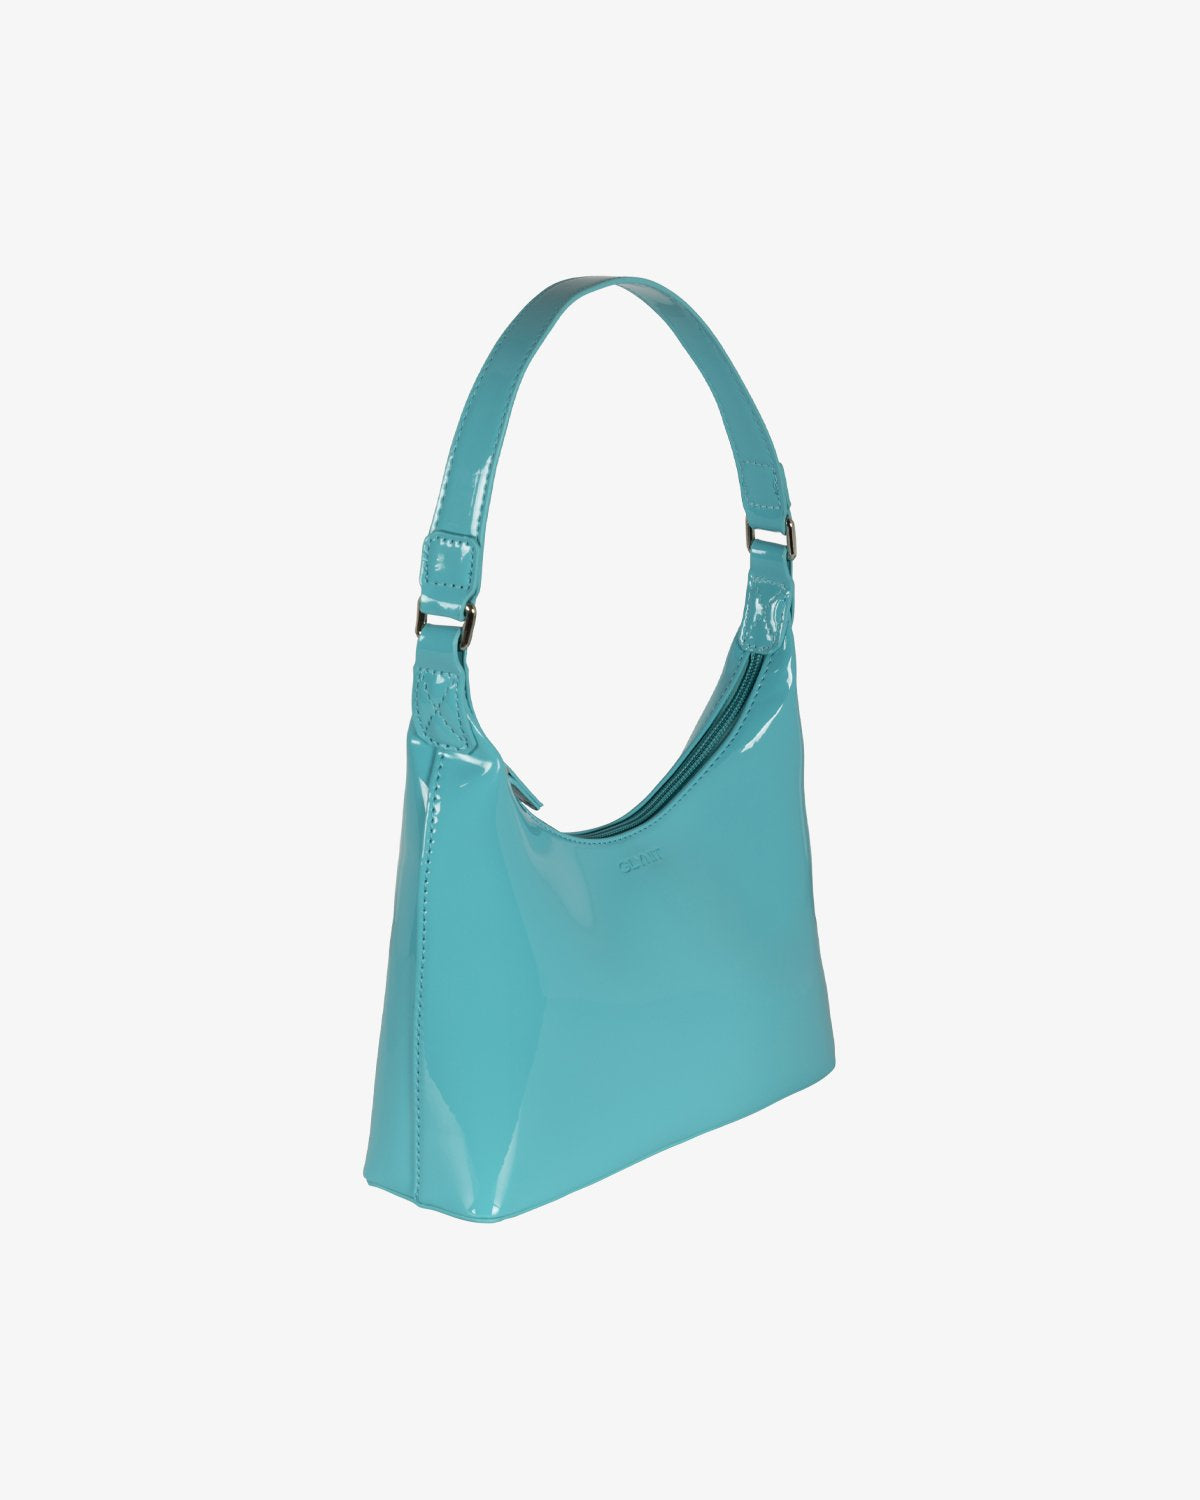 THE MOLLY BAG - AQUA BLUE - EXCLUSIVE Bags from GLYNIT - Just €69! SHOP NOW AT IAMINHATELOVE BOTH IN STORE FOR CYPRUS AND ONLINE WORLDWIDE @ IAMINHATELOVE.COM